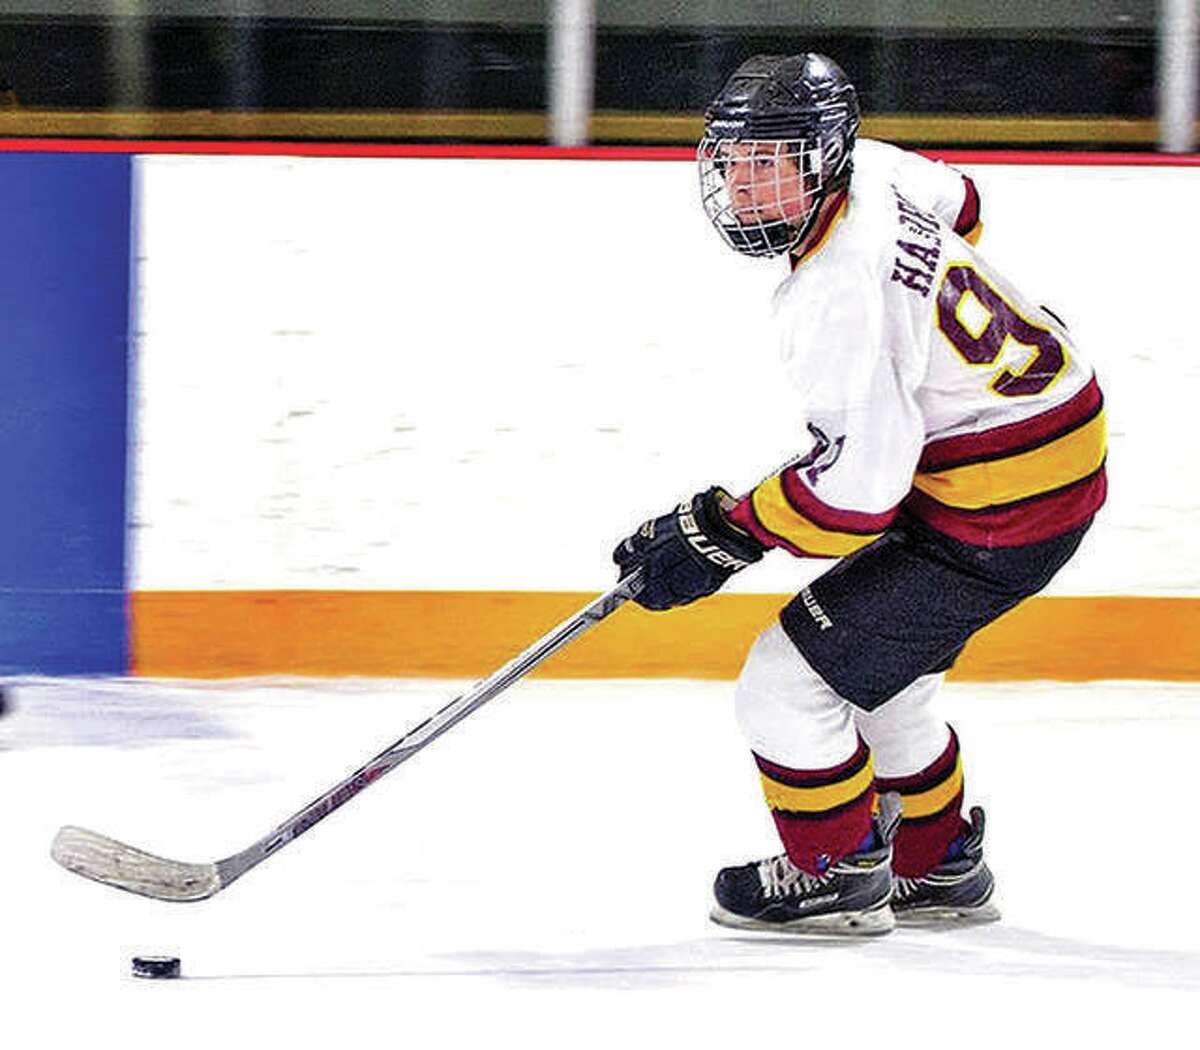 Kaleb Harrop of East Alton-Wood river scored seven of his team’s goals in an 8-8 tie with Alton Tuesday night at the East Alton Ice Arena. He scored the tying goal with 6:32 left in the third period.